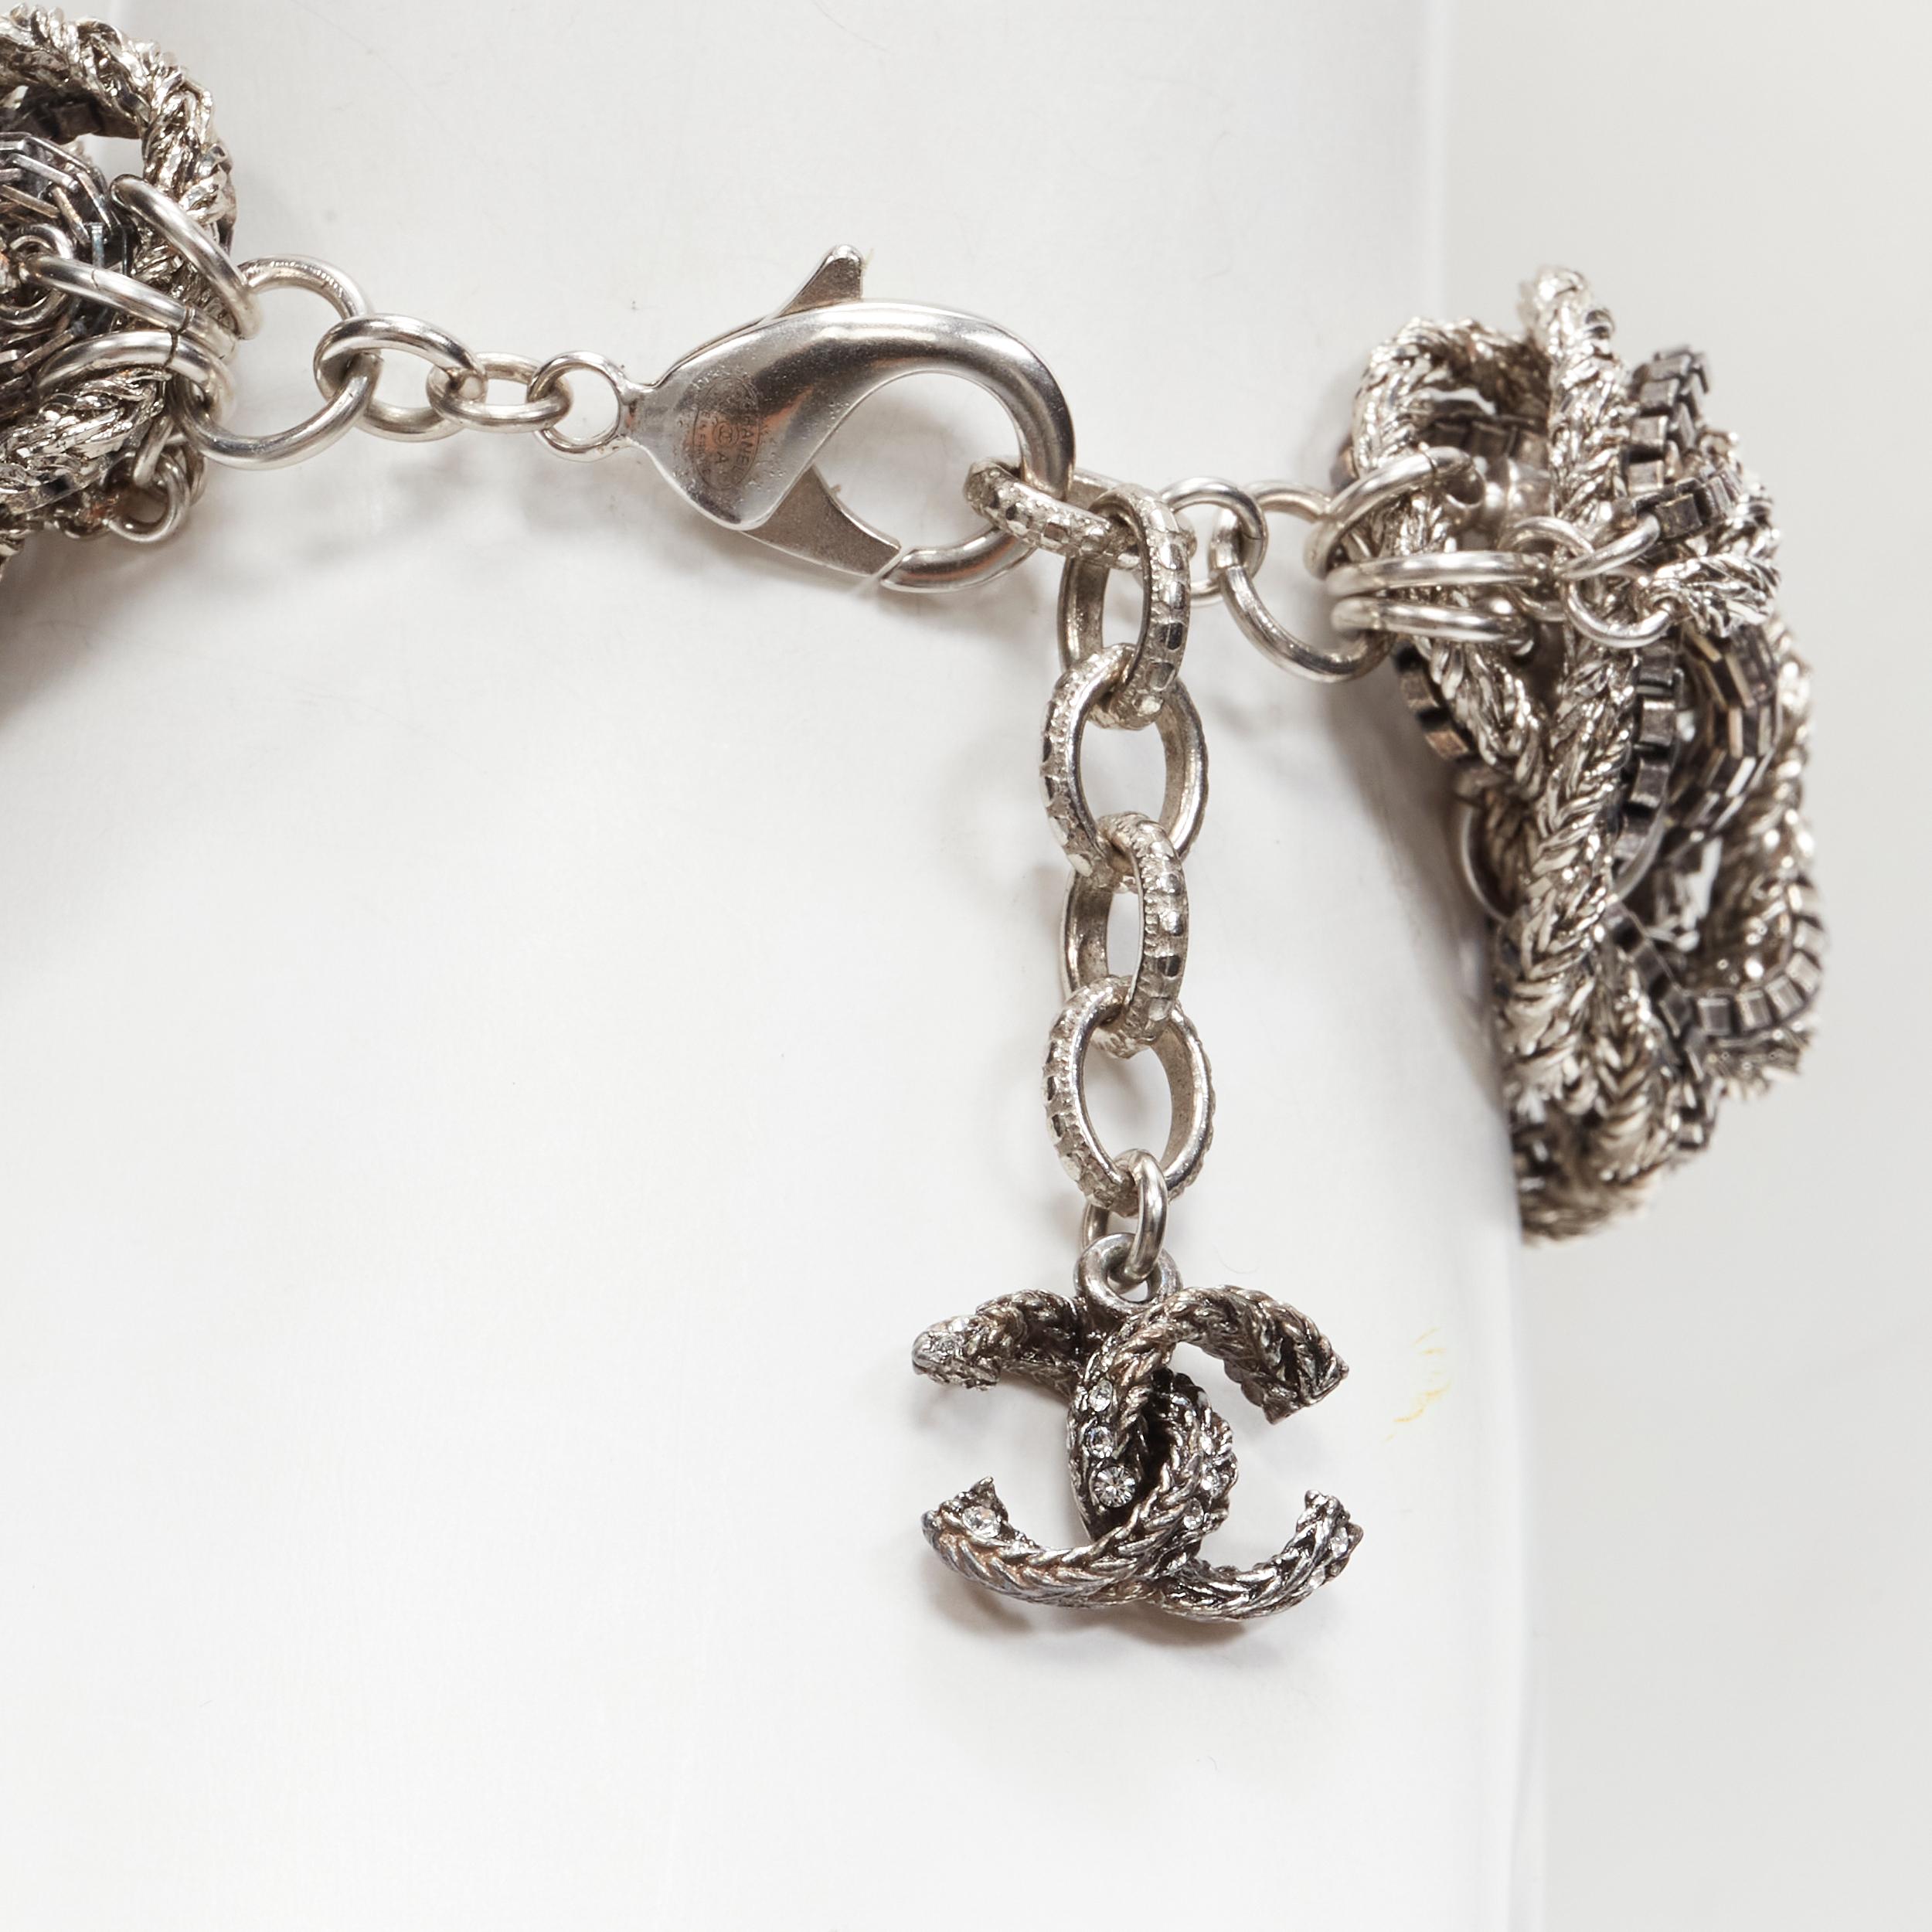 CHANEL 17A Paris Cosmopolite silver CC crystal charm twist chain bracelet
Brand: Chanel
Designer: Karl Lagerfeld
Collection: 17A Paris Cosmopolite Metier D'Art 
Material: Metal
Color: Silver
Pattern: Solid
Closure: Lobster Clasp
Extra Detail: